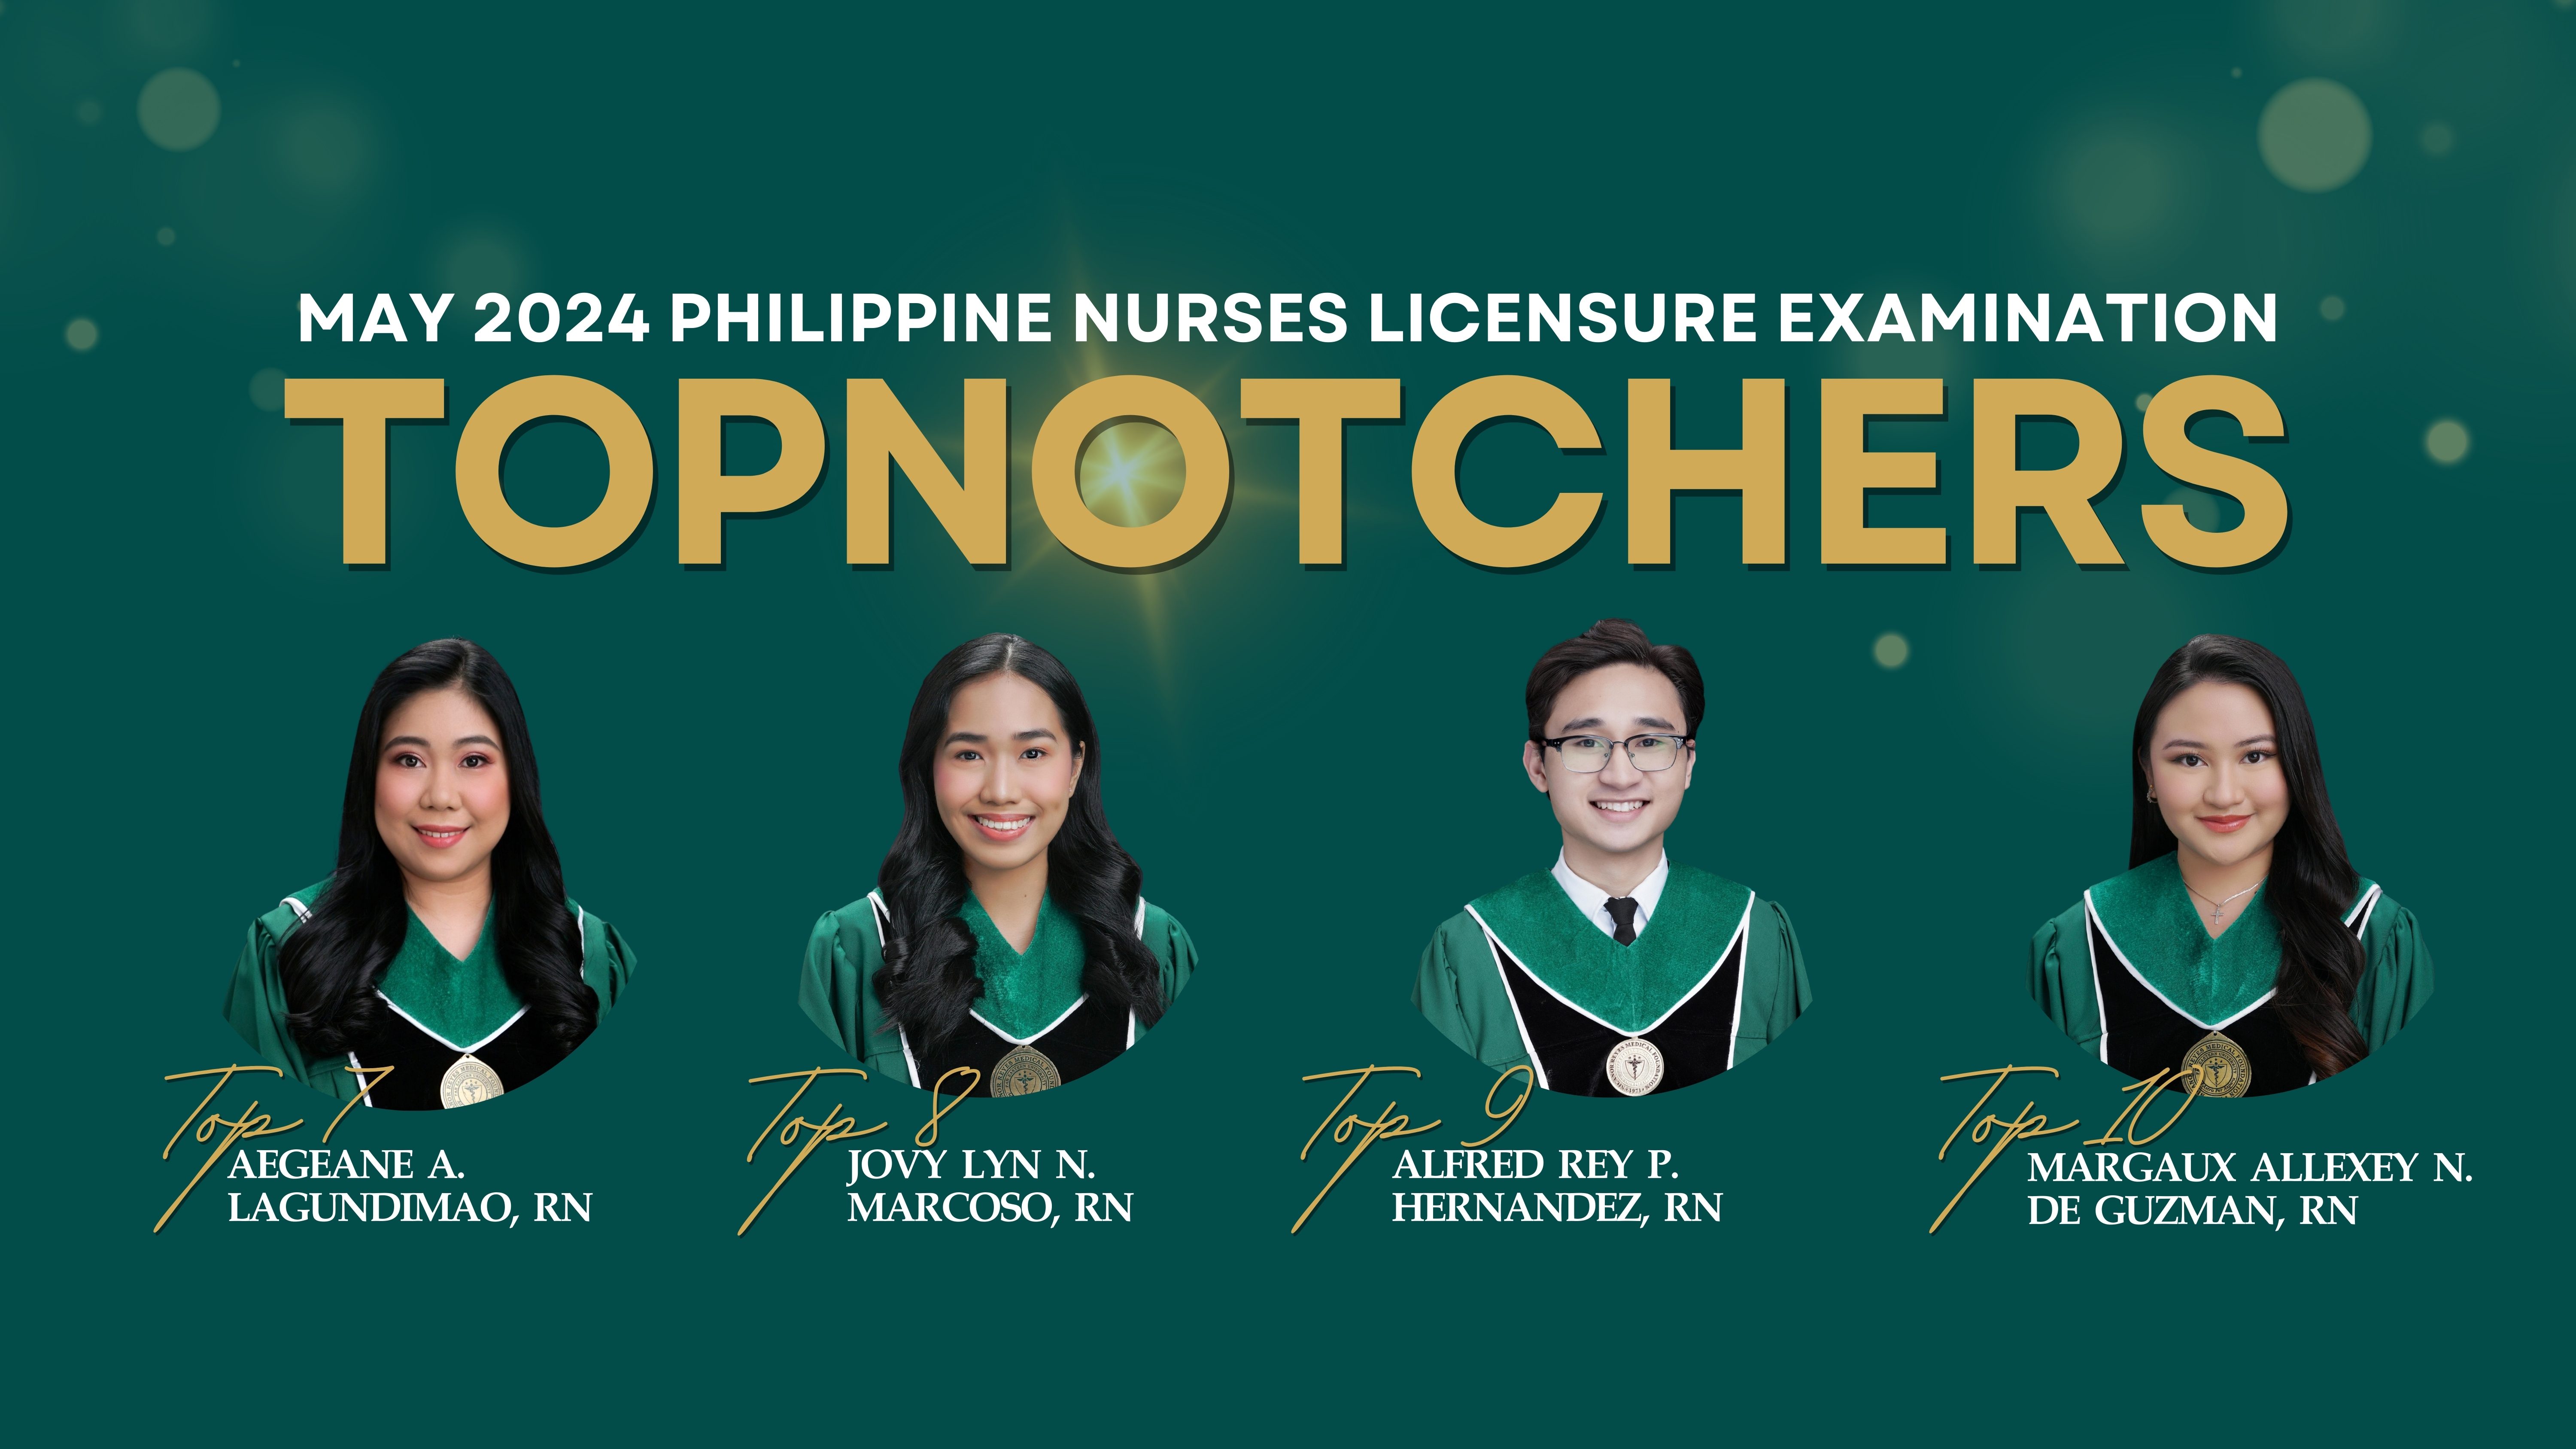 FEU-NRMF yielded four topnotchers in the May 2024 Philippine Nurses Licensure Examination